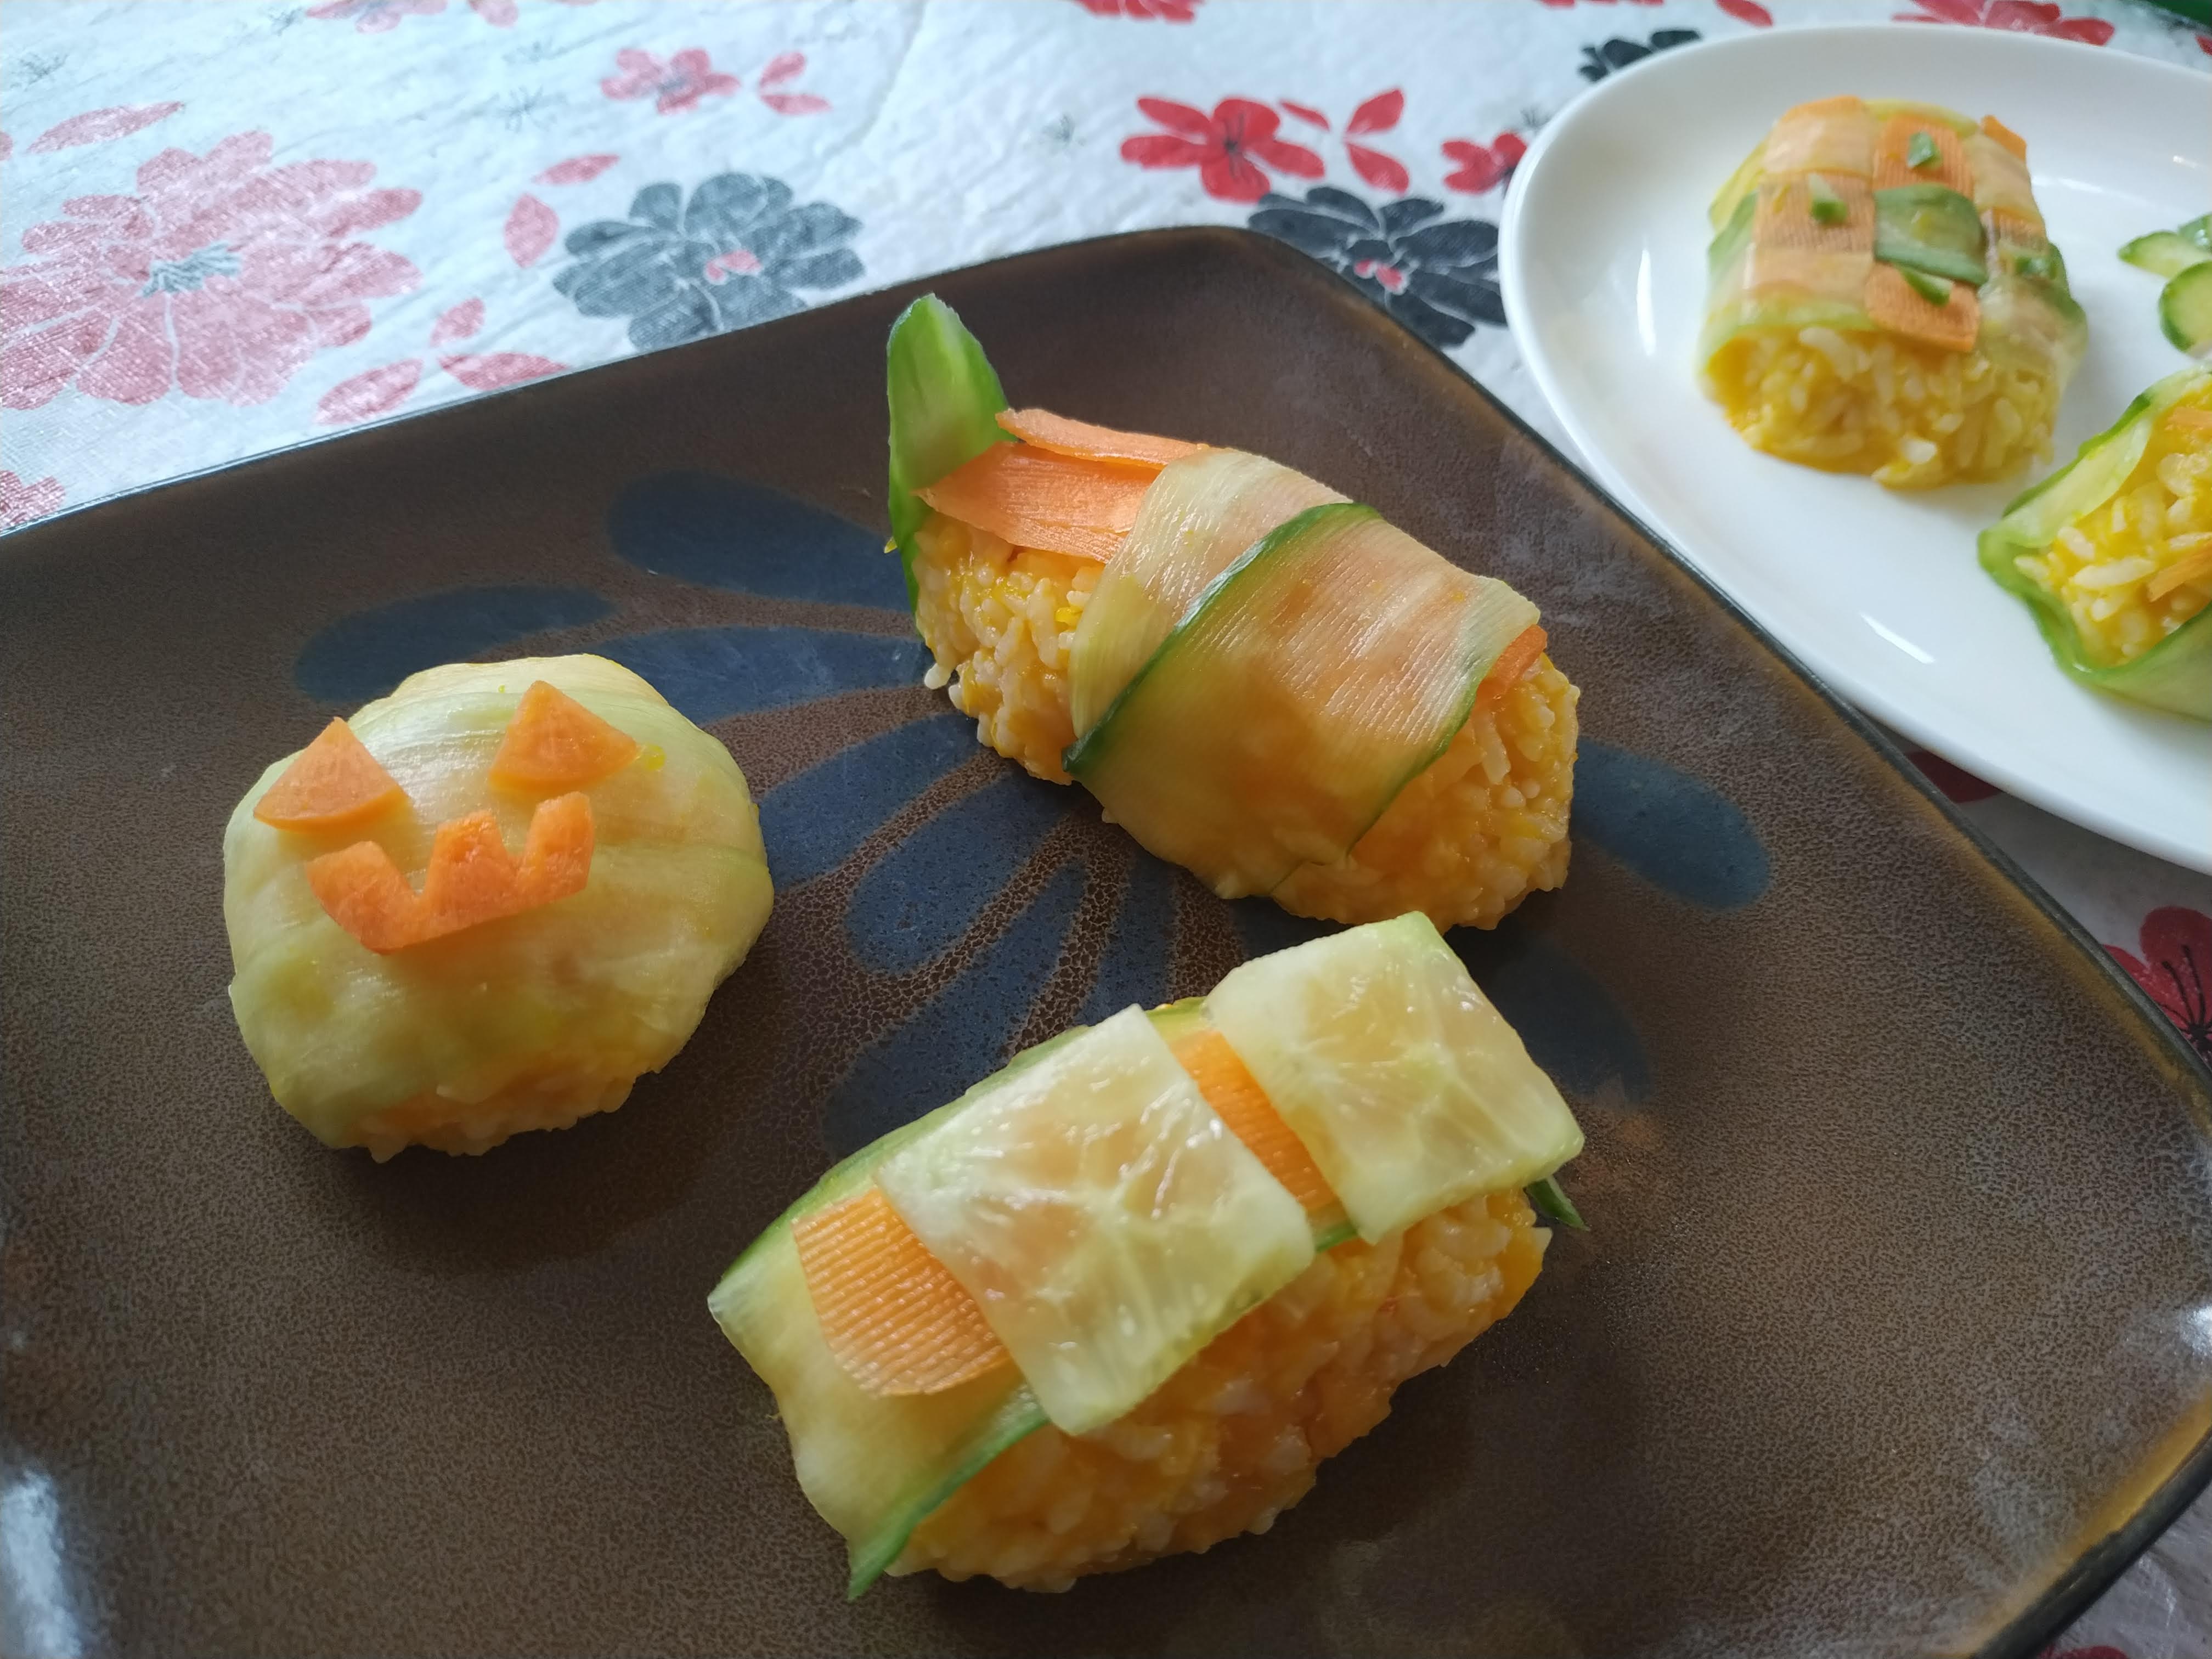 A plate of halloween themed sushi with pumpkin, carrot, rice, and cucumber